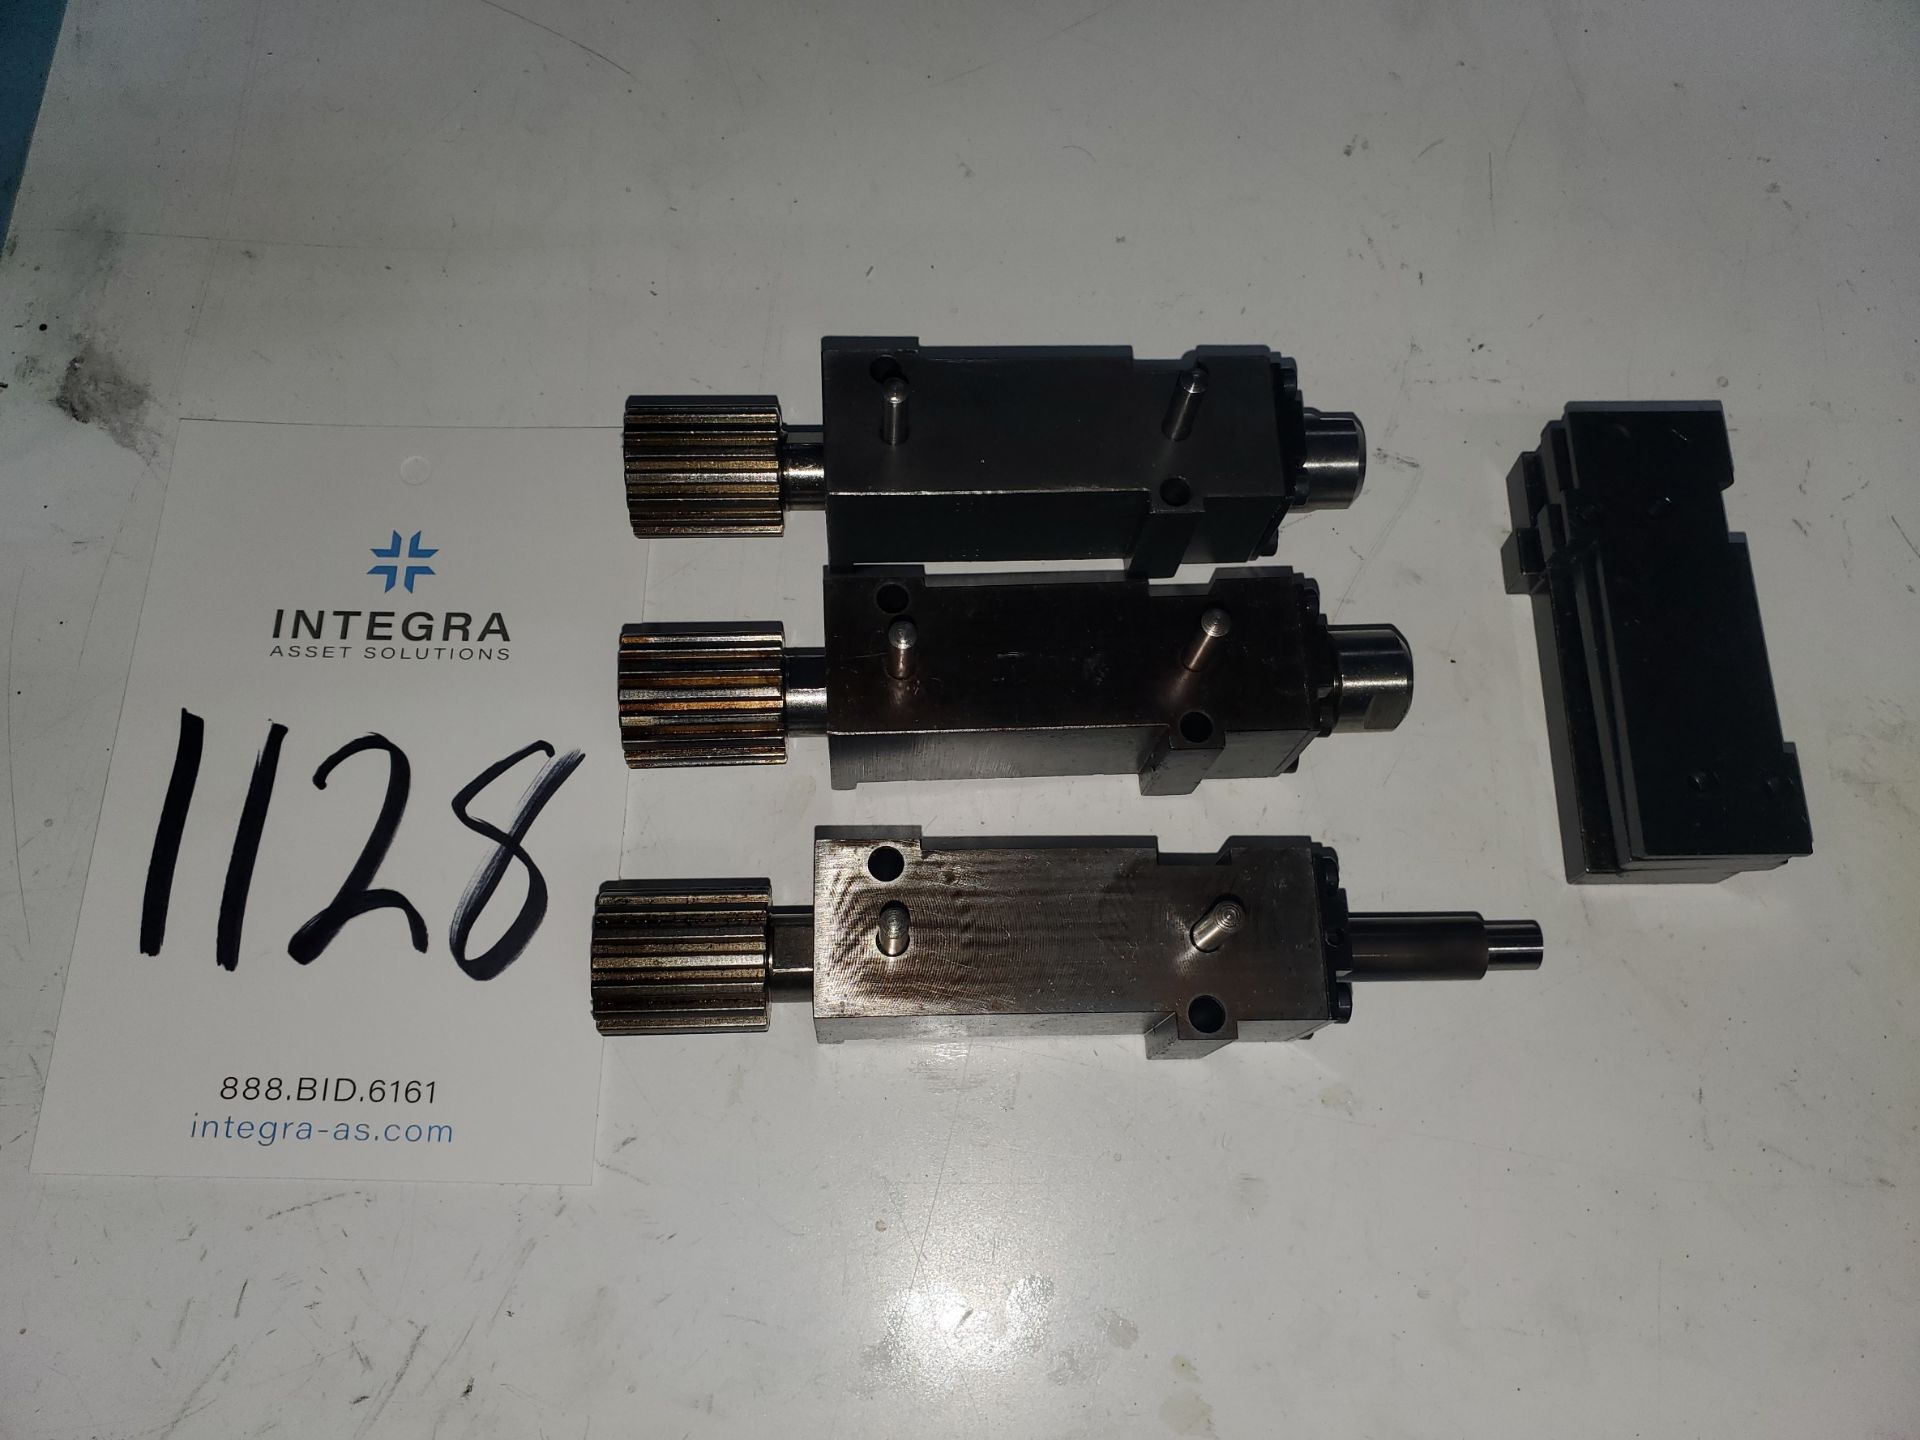 (3) Deco 10 Milling/Drilling Spindles w/ Spacer Plates